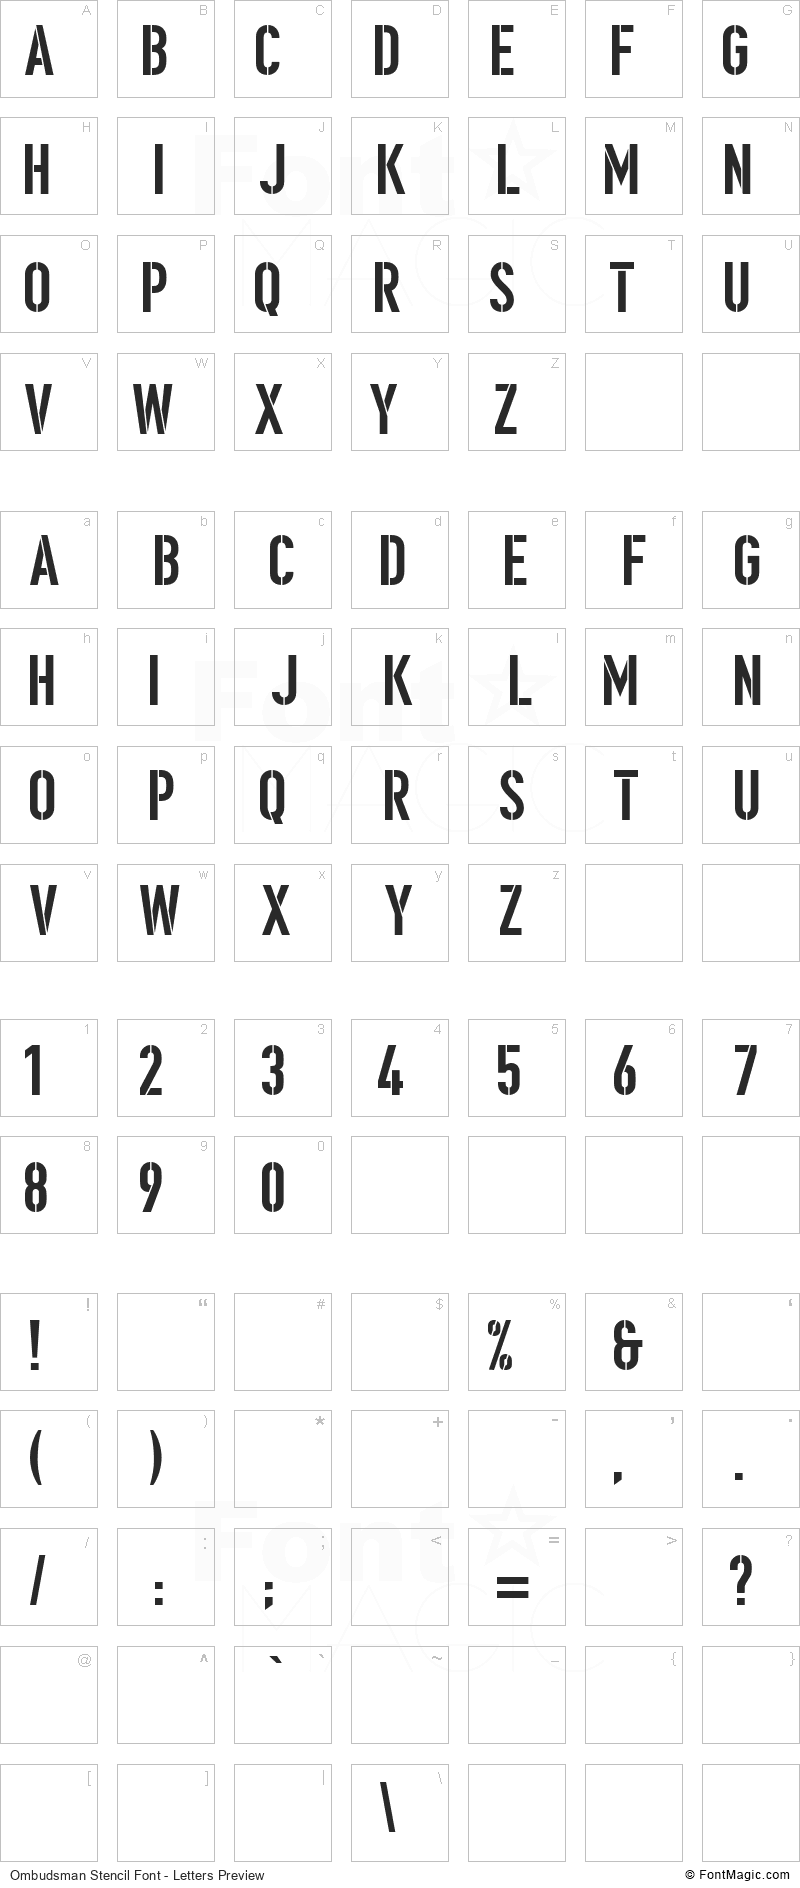 Ombudsman Stencil Font - All Latters Preview Chart